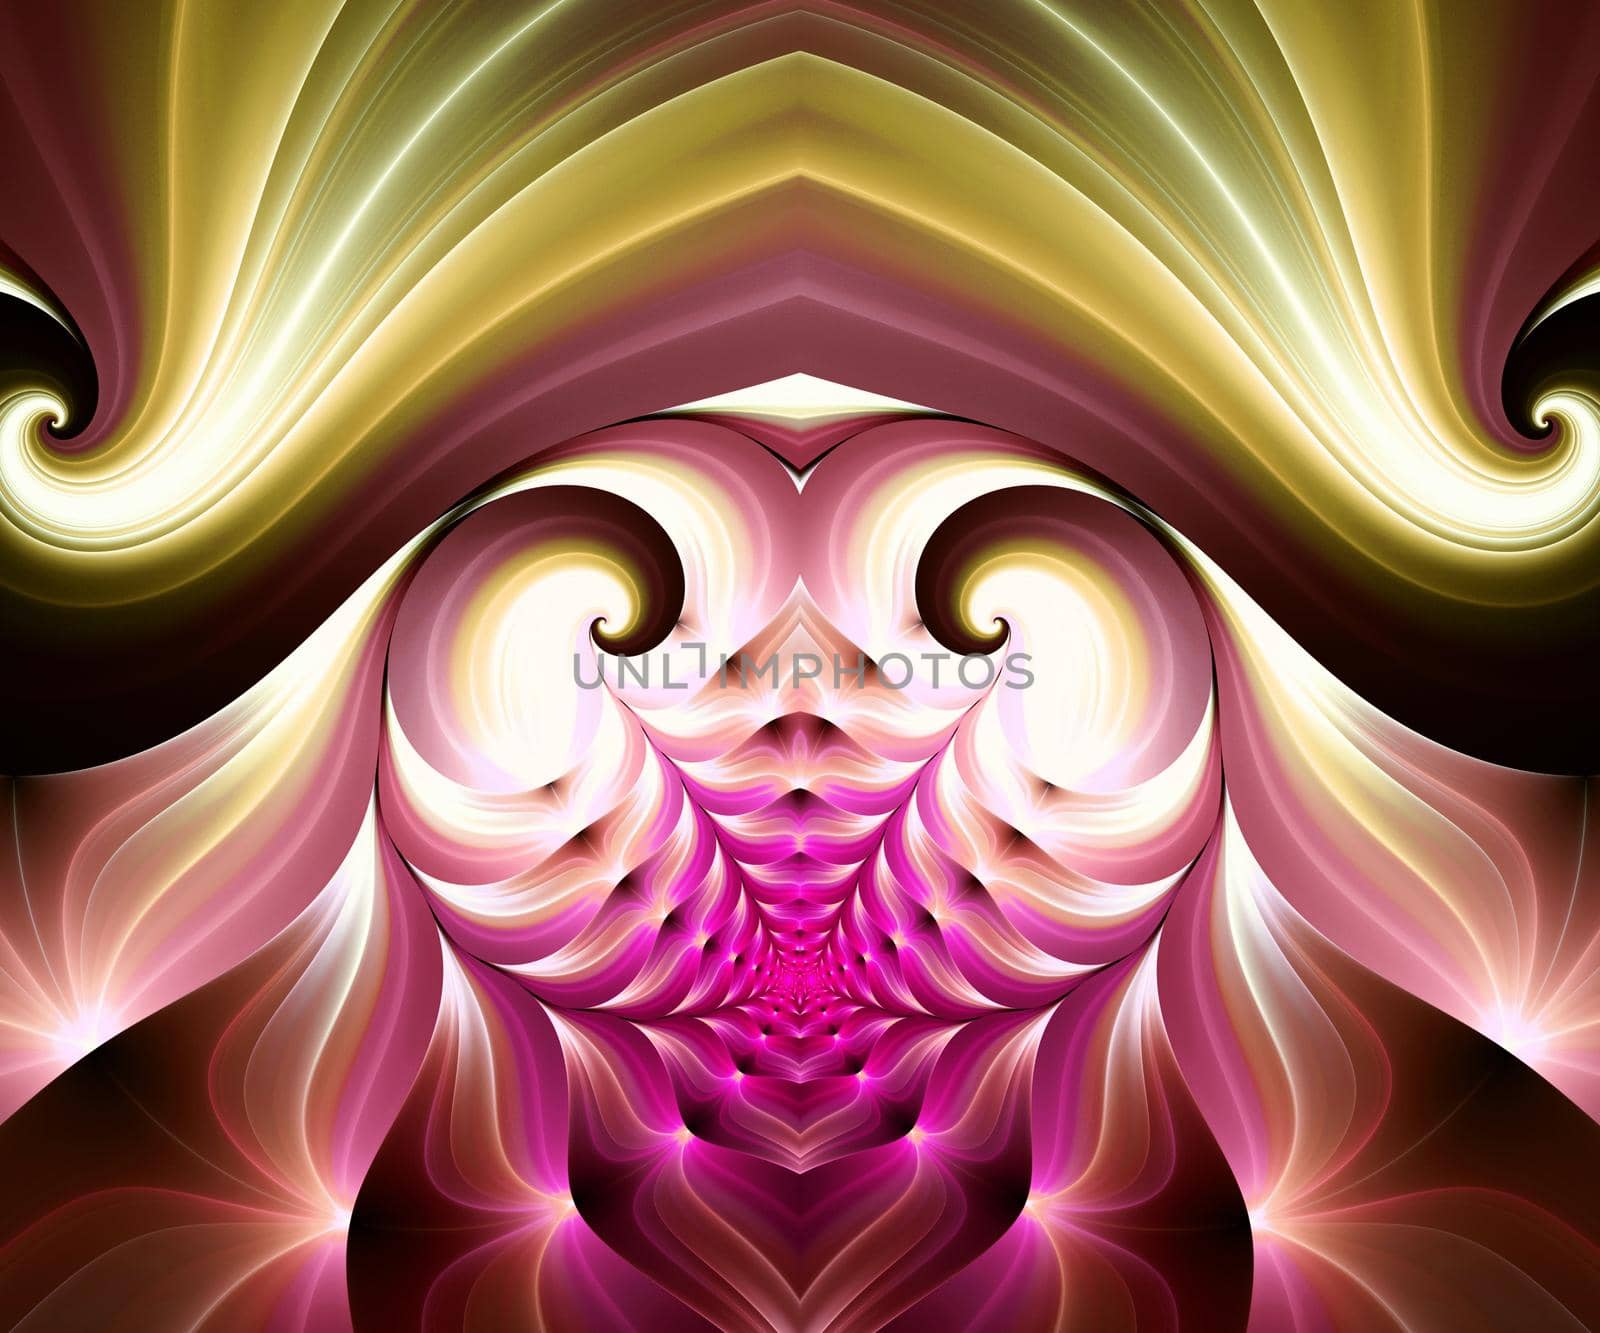 Computer generated colorful fractal artwork for creative art,design and entertainment